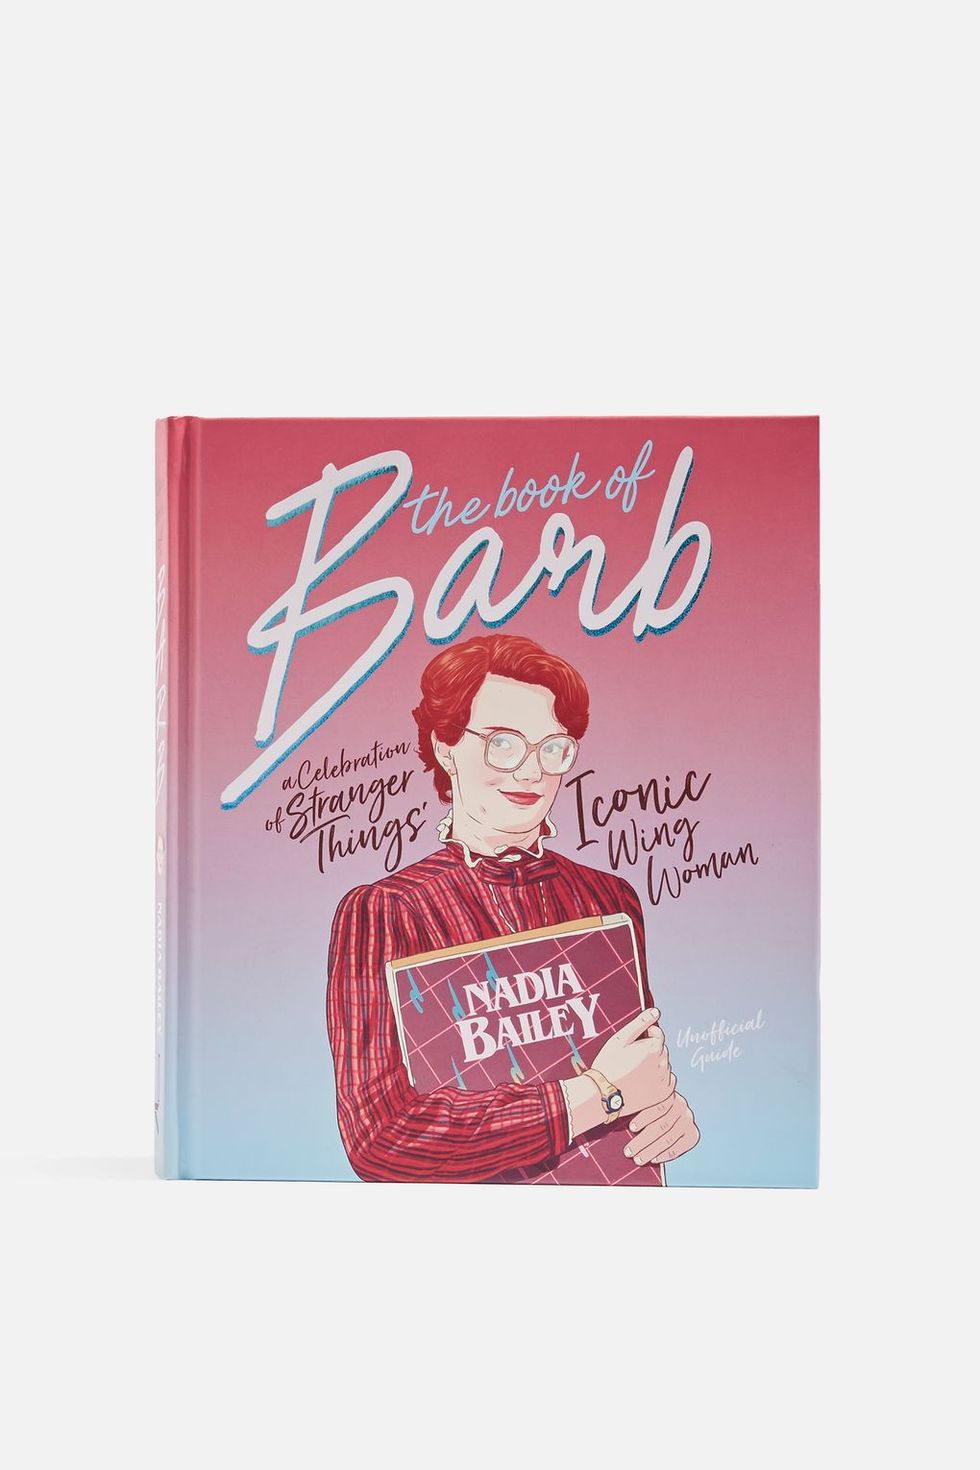 Did Barb Die in Stranger Things Season 2? Justice for Barb Lives